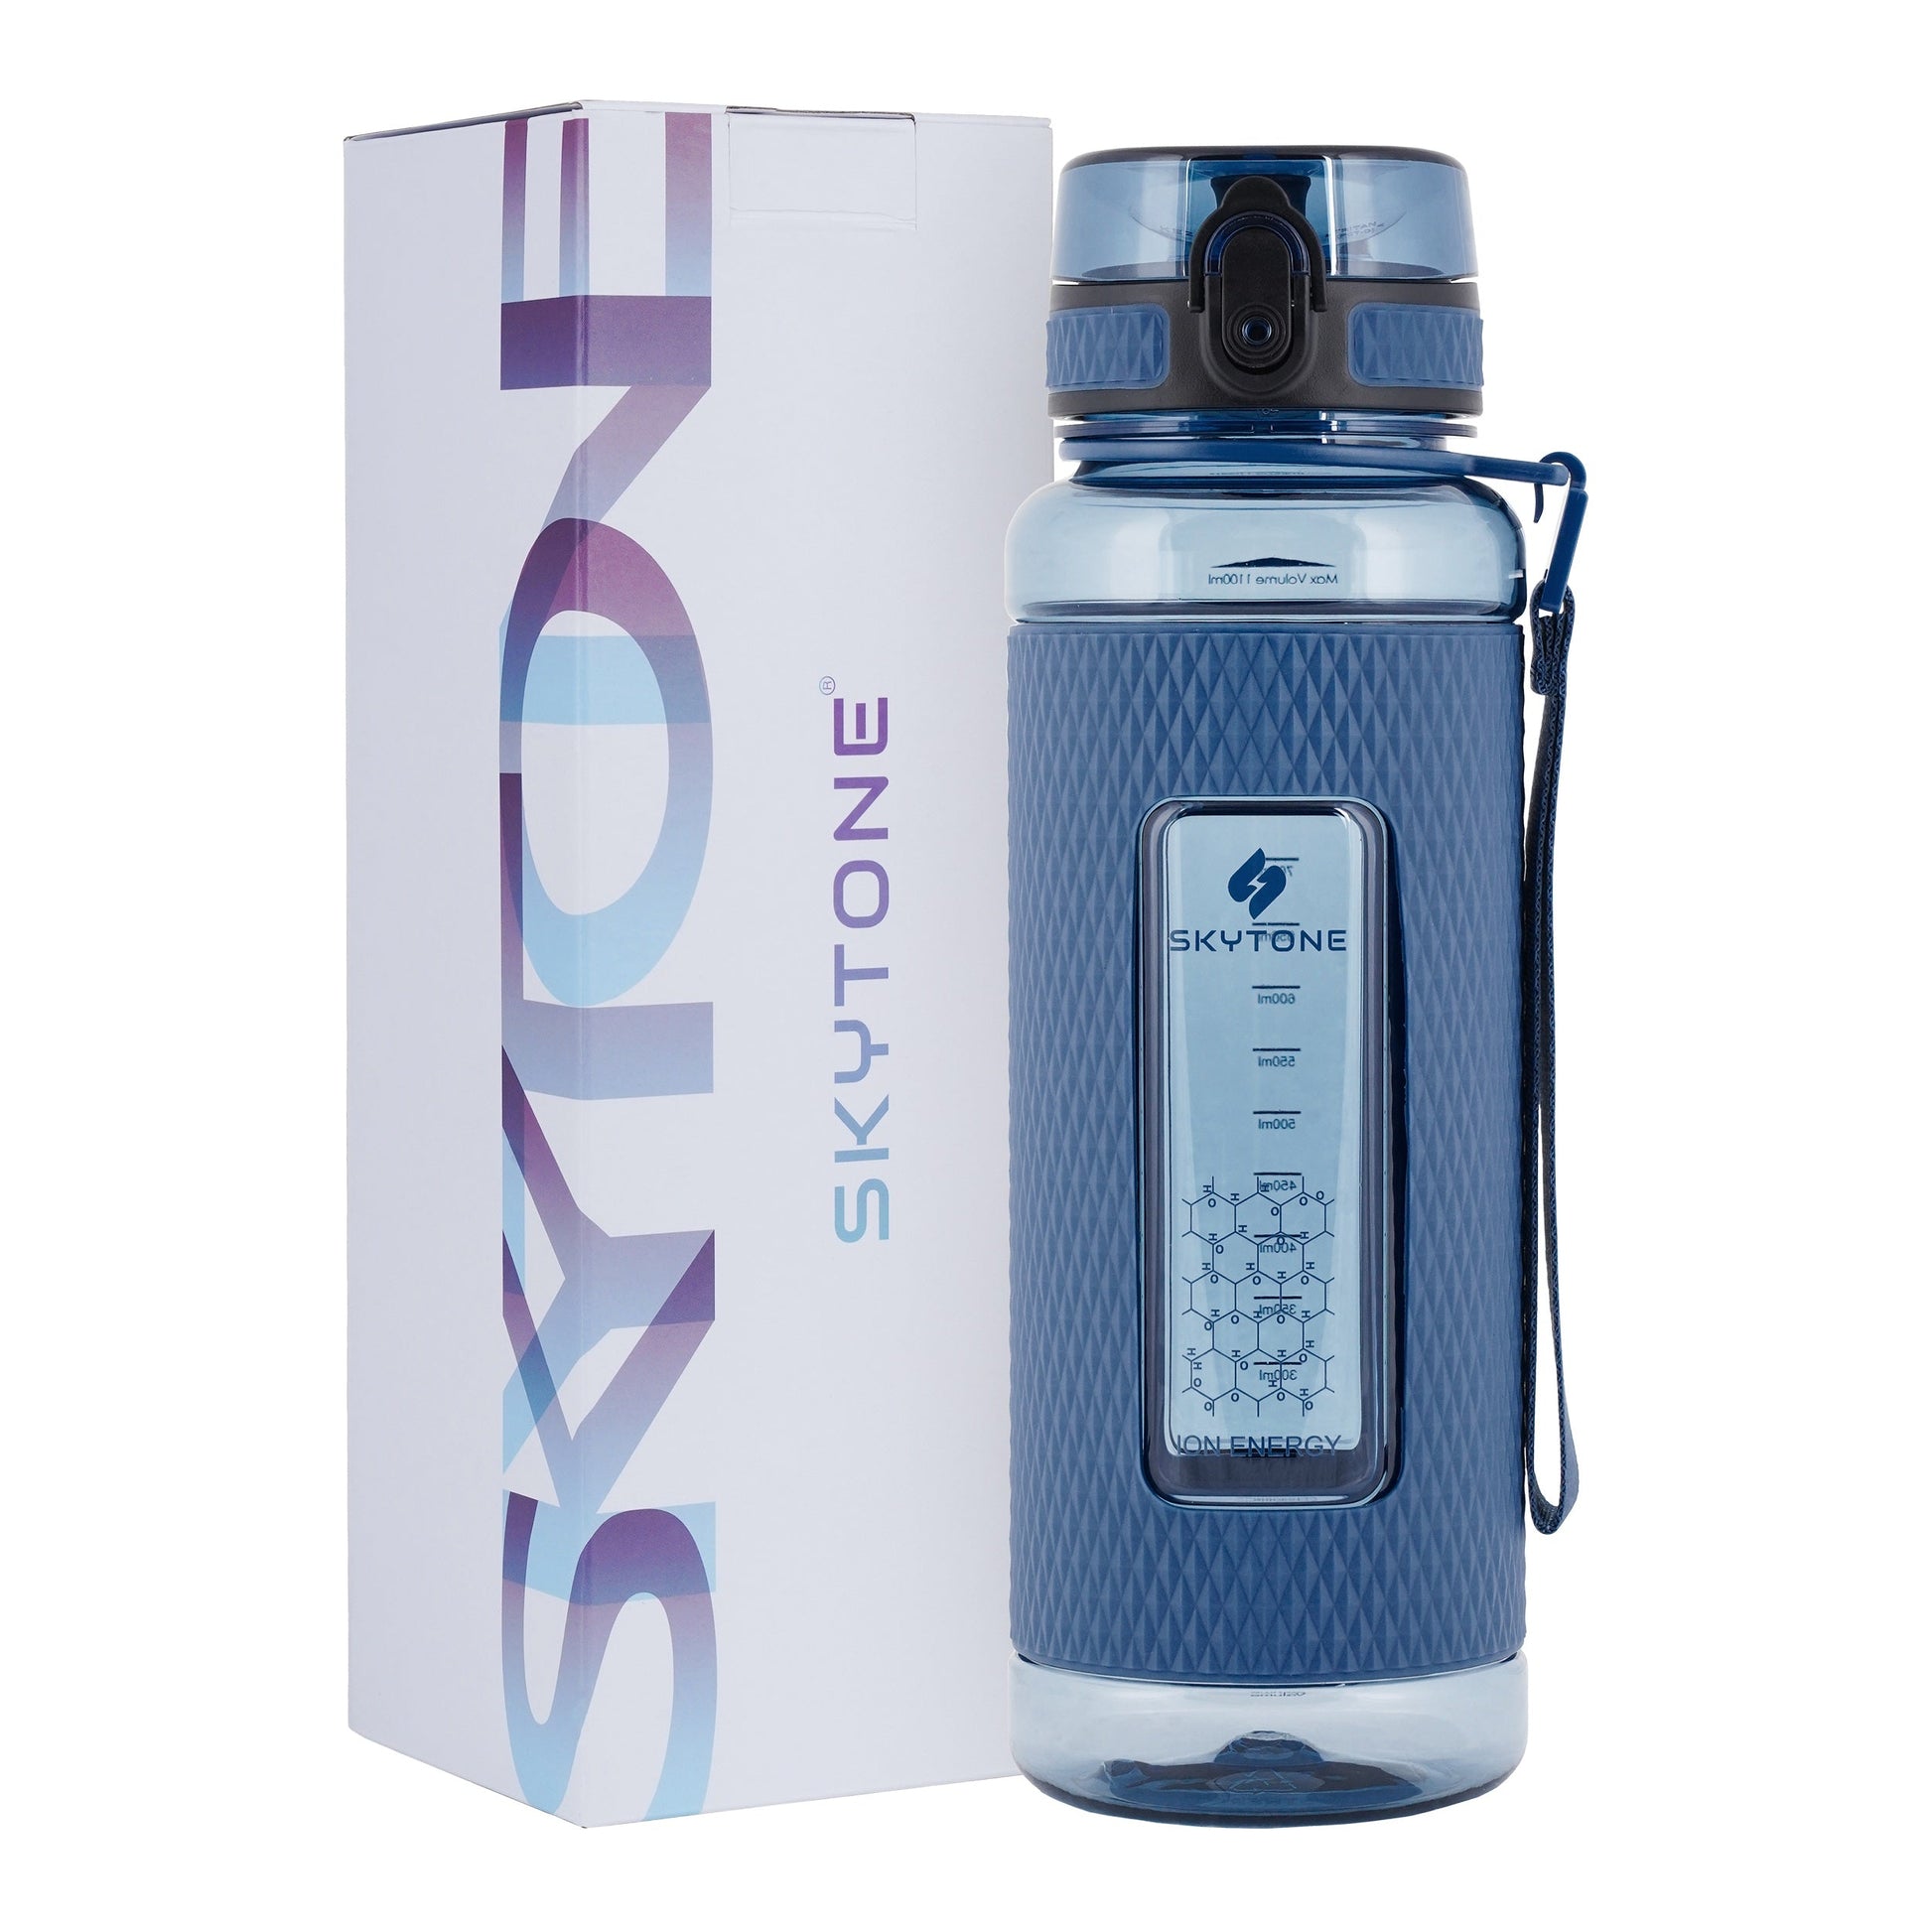 SKYTONE Sports Water Bottle, 1L ( 32oz) Leak Proof & BPA Free Tritan Plastic Reusable Water Bottles, Ideal Gift for Travel Gym fitness Running School With Silicon Grip